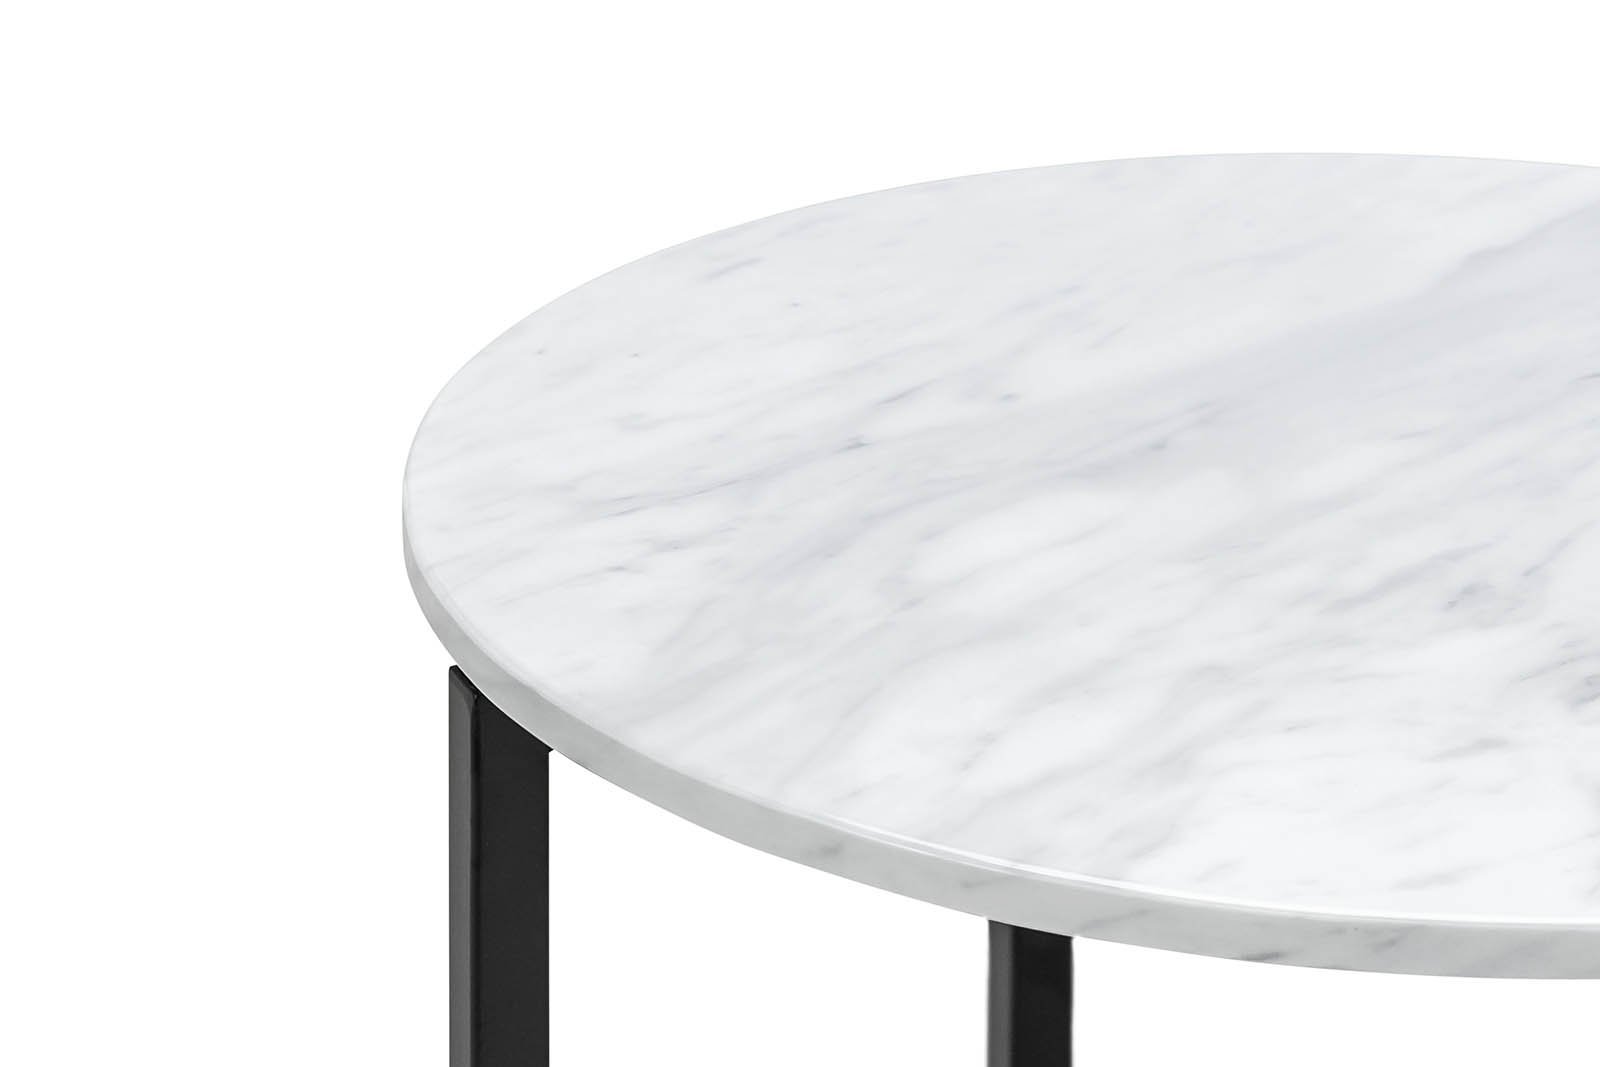 Hudson Round White Marble Side Table - Bedside Tables